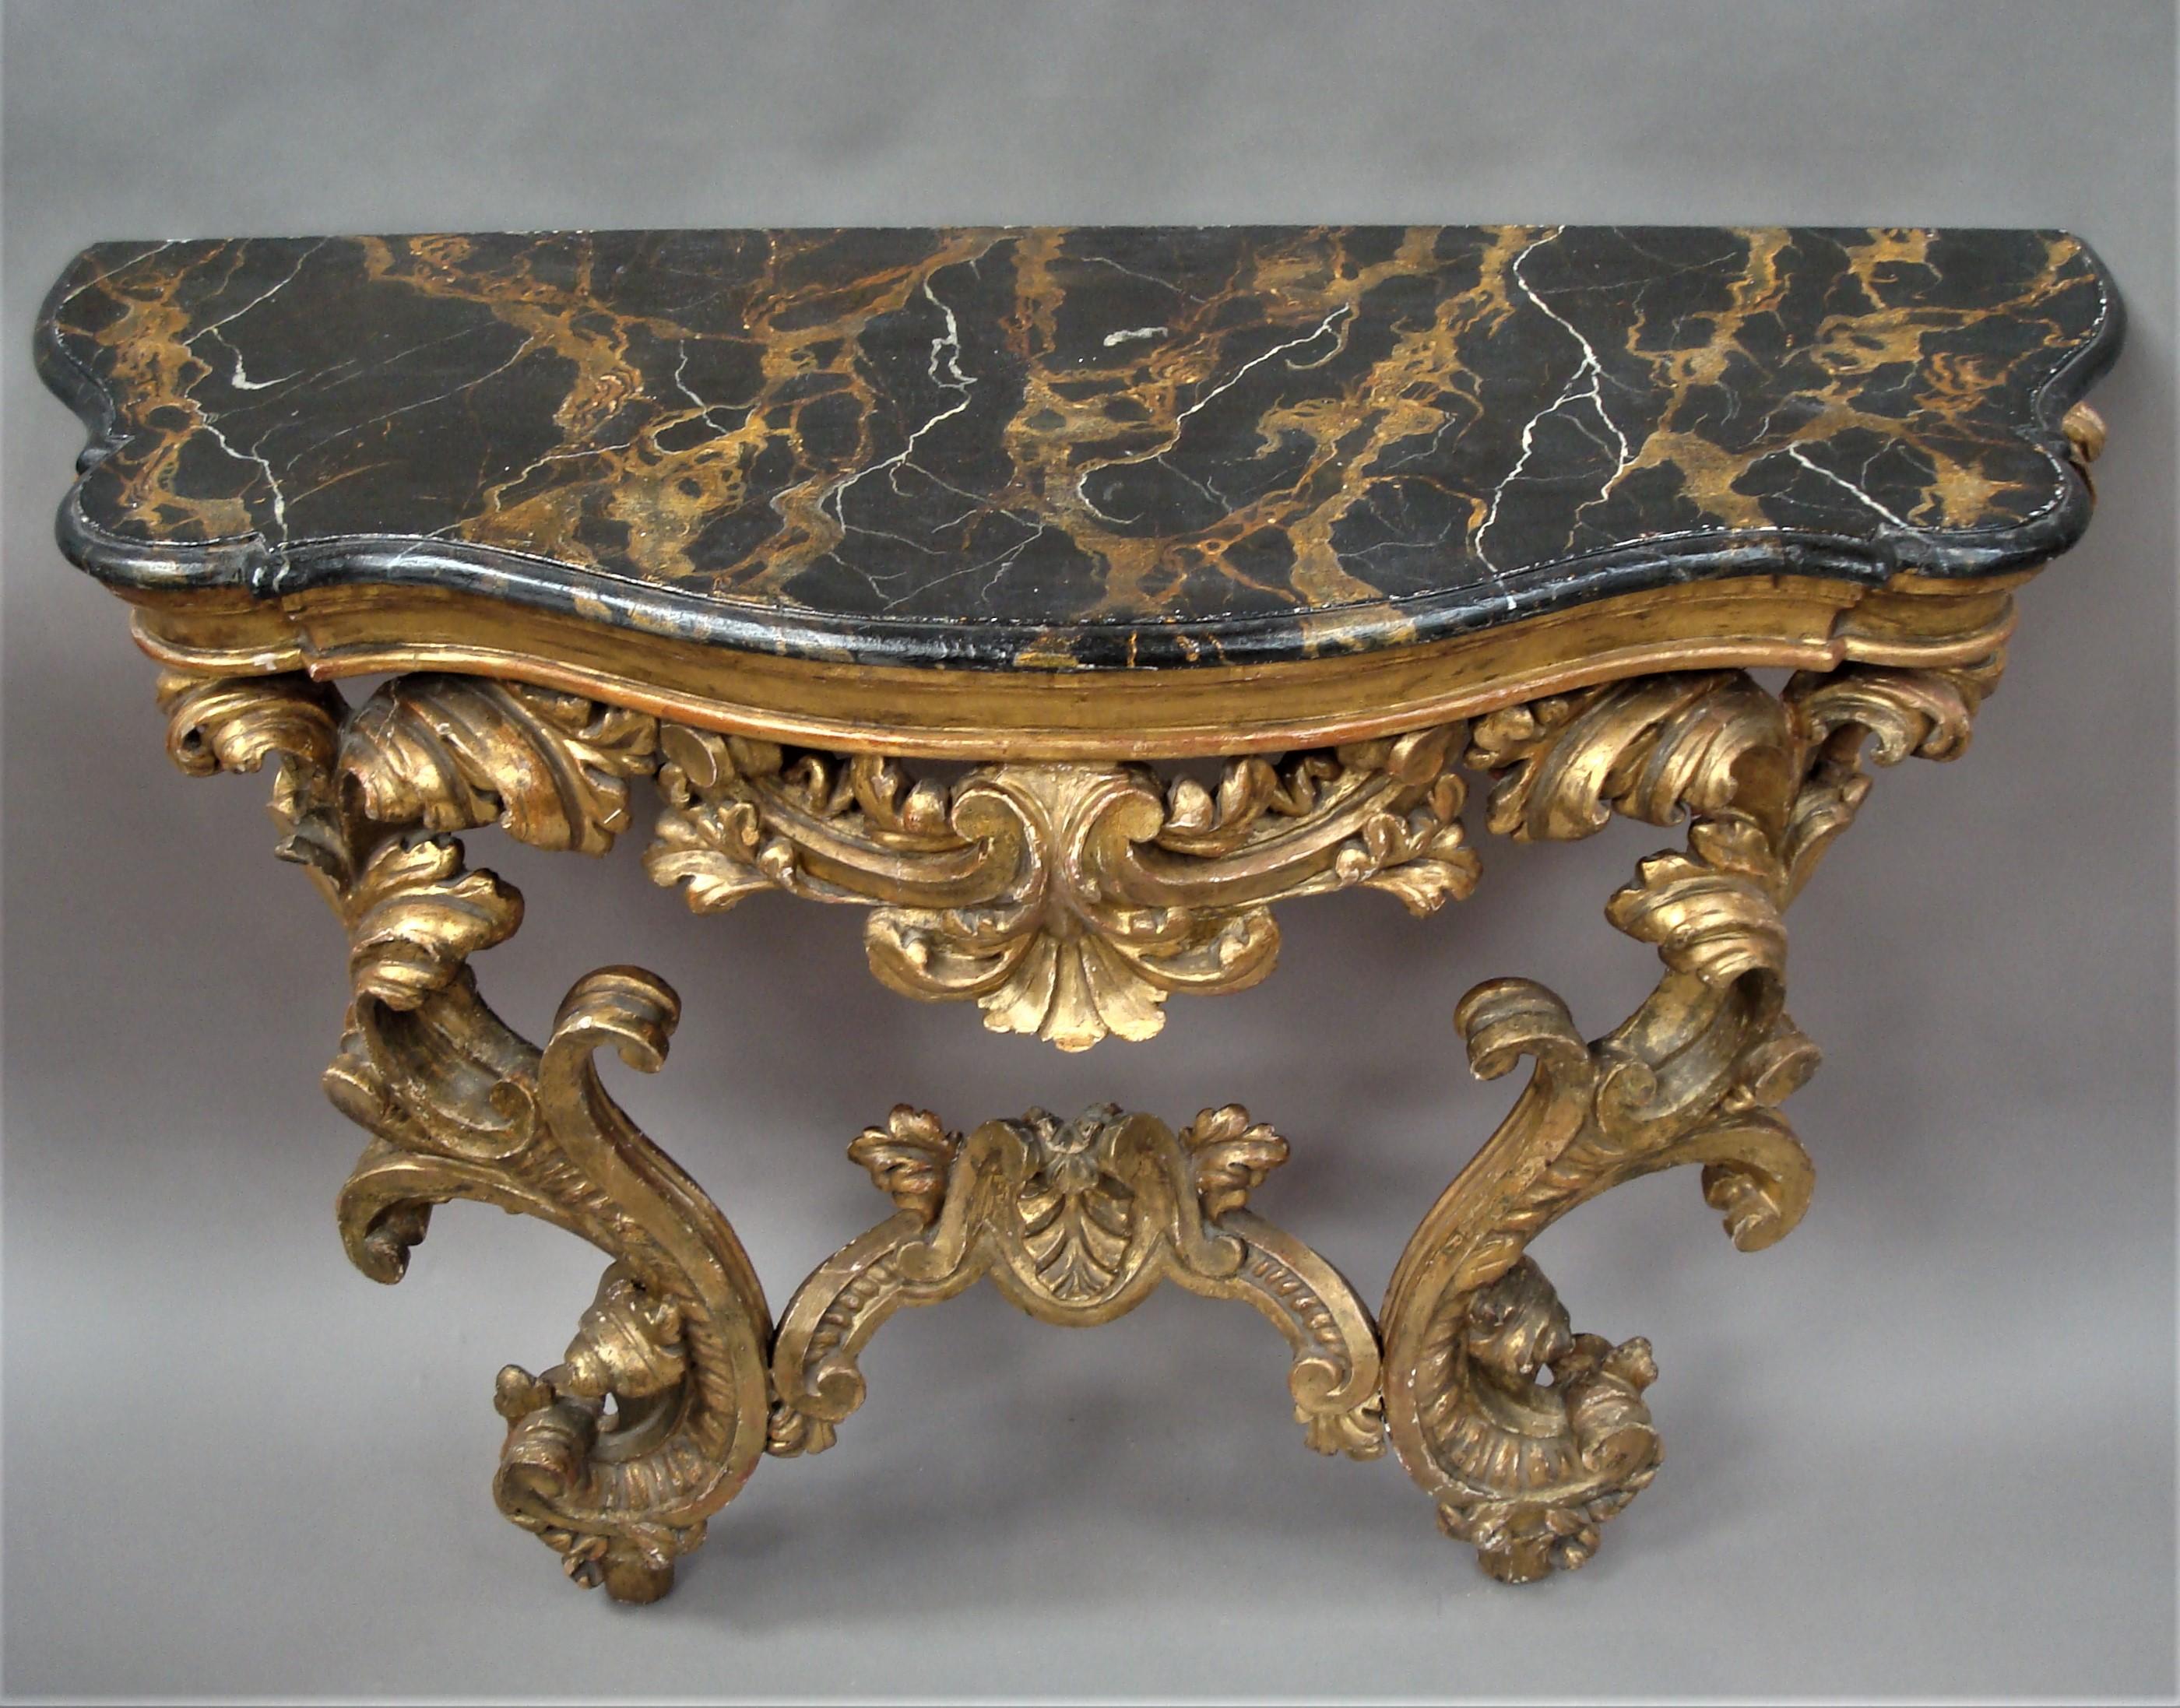 18th Century Venetian Rococo Giltwood Console Table im Zustand „Gut“ im Angebot in Moreton-in-Marsh, Gloucestershire